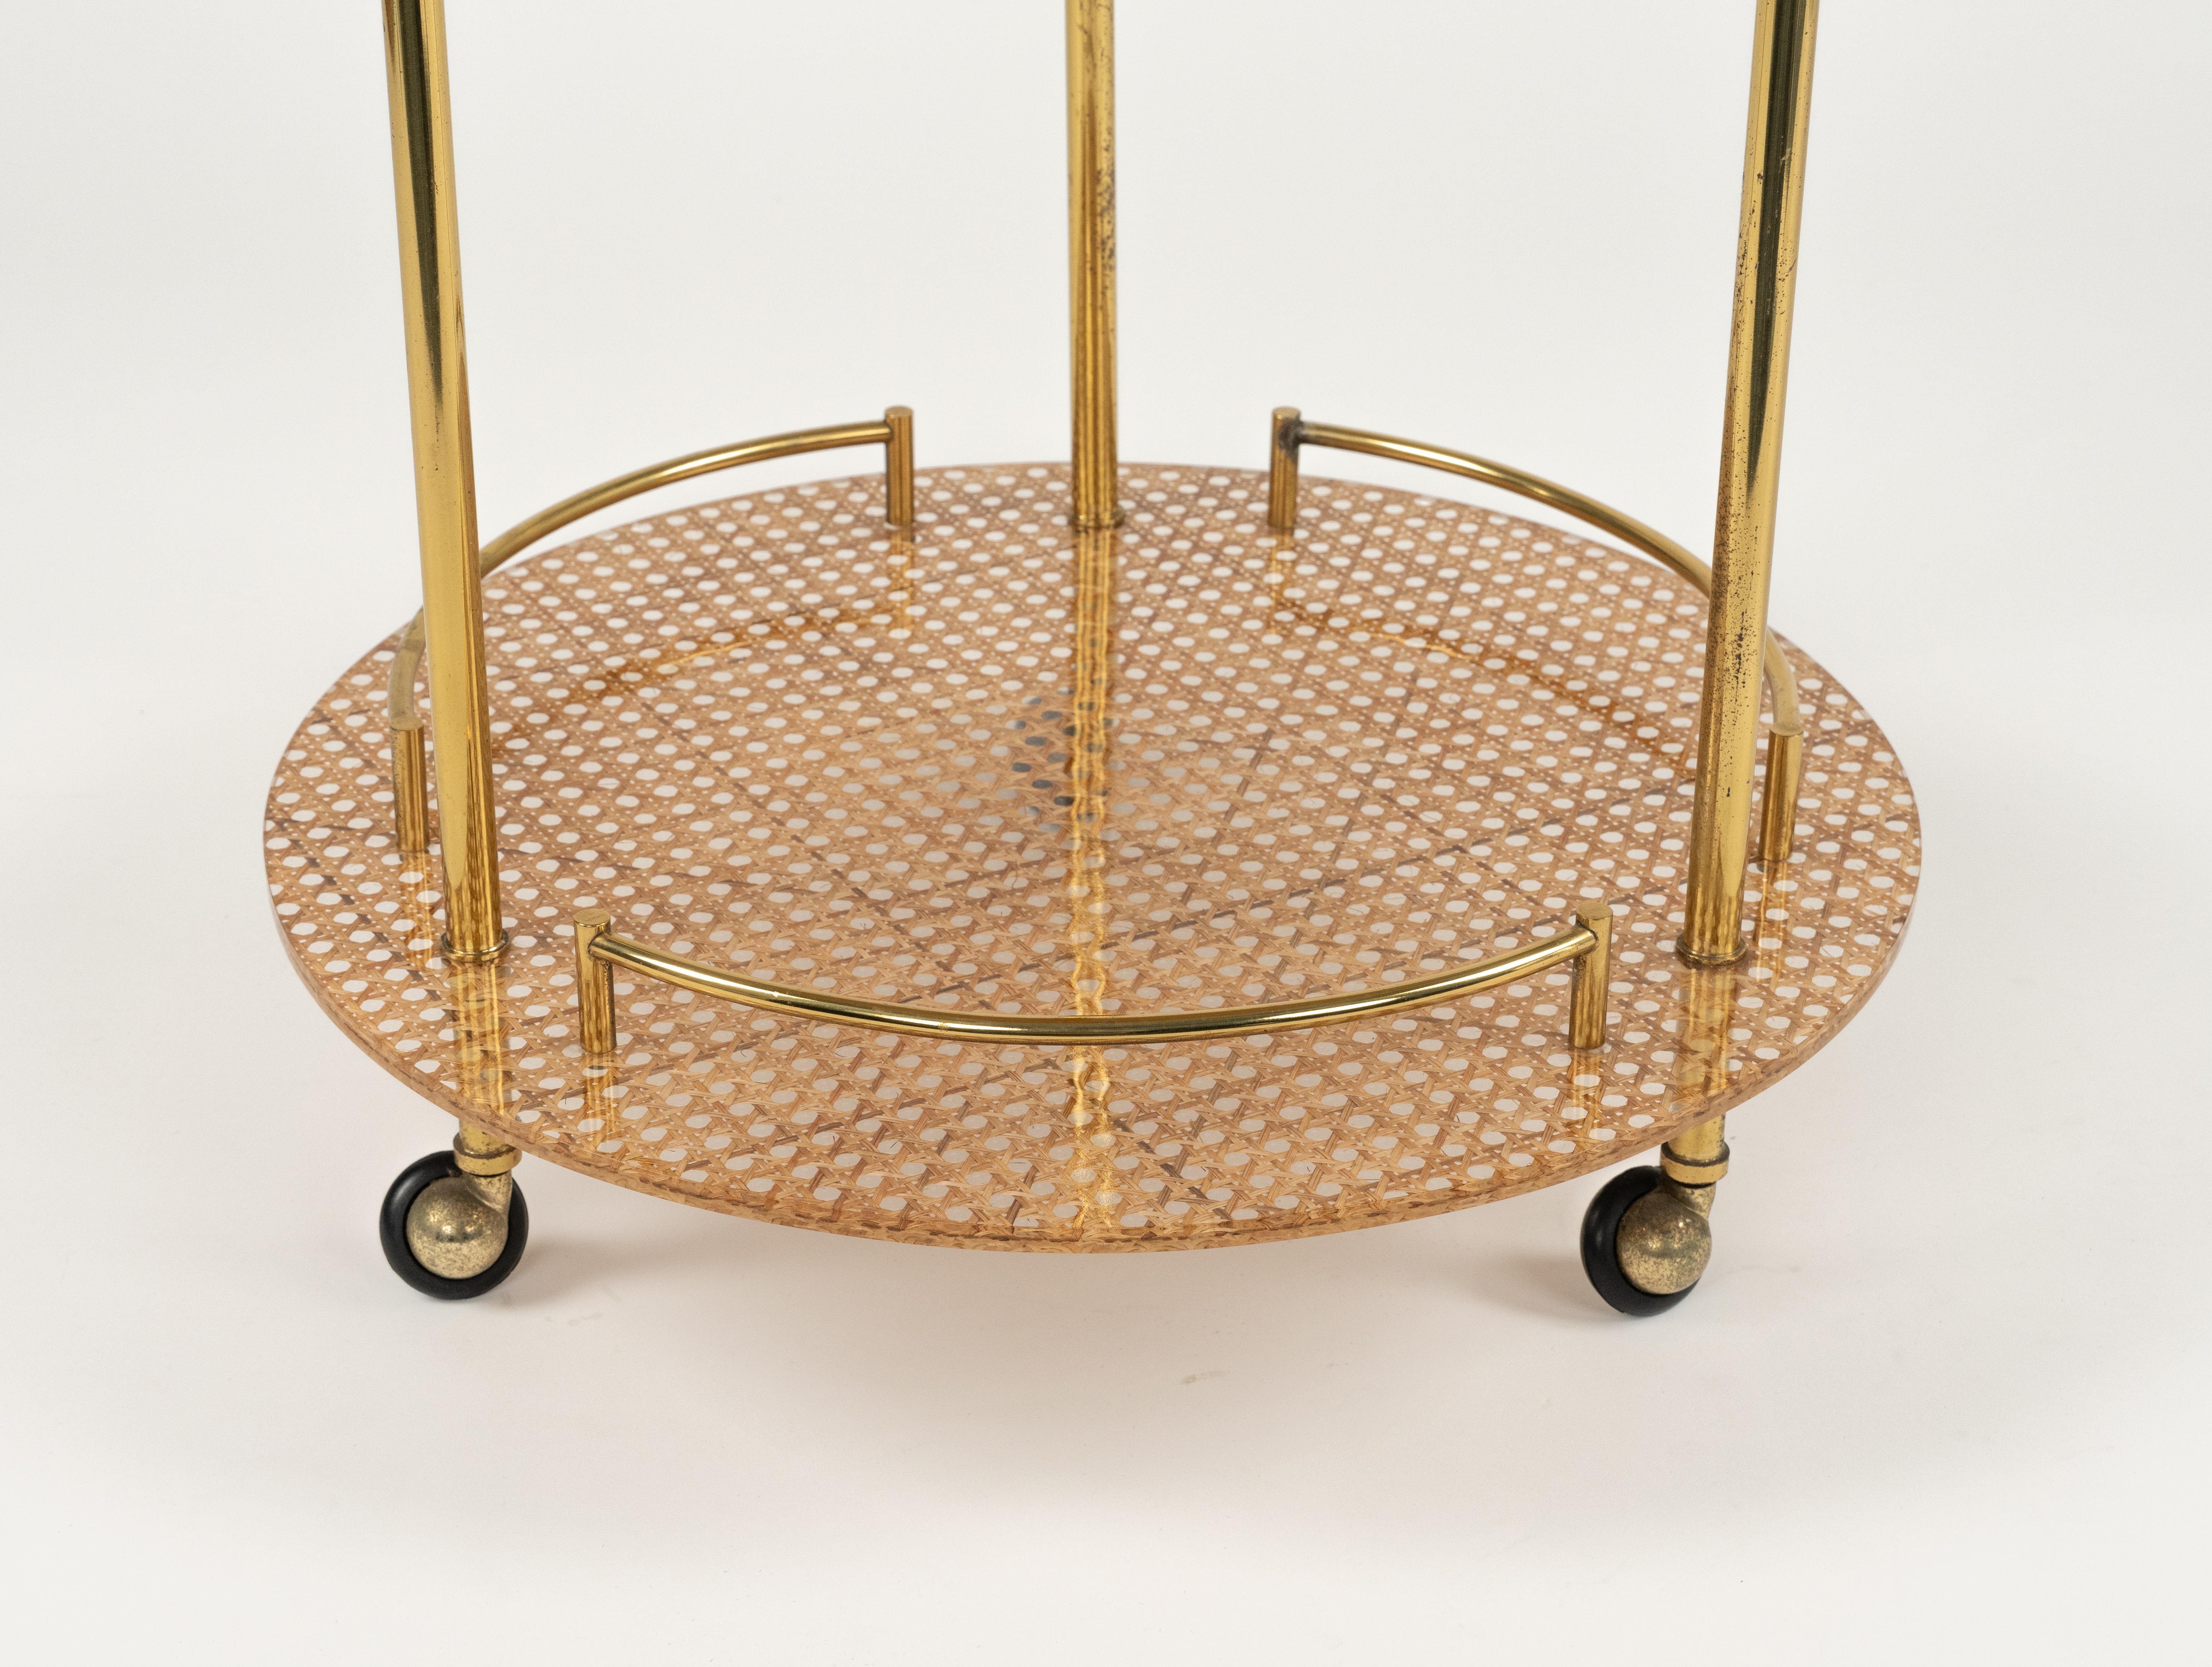 Serving Bar Cart in Lucite, Brass and Rattan Christian Dior Style, Italy 1970s For Sale 5